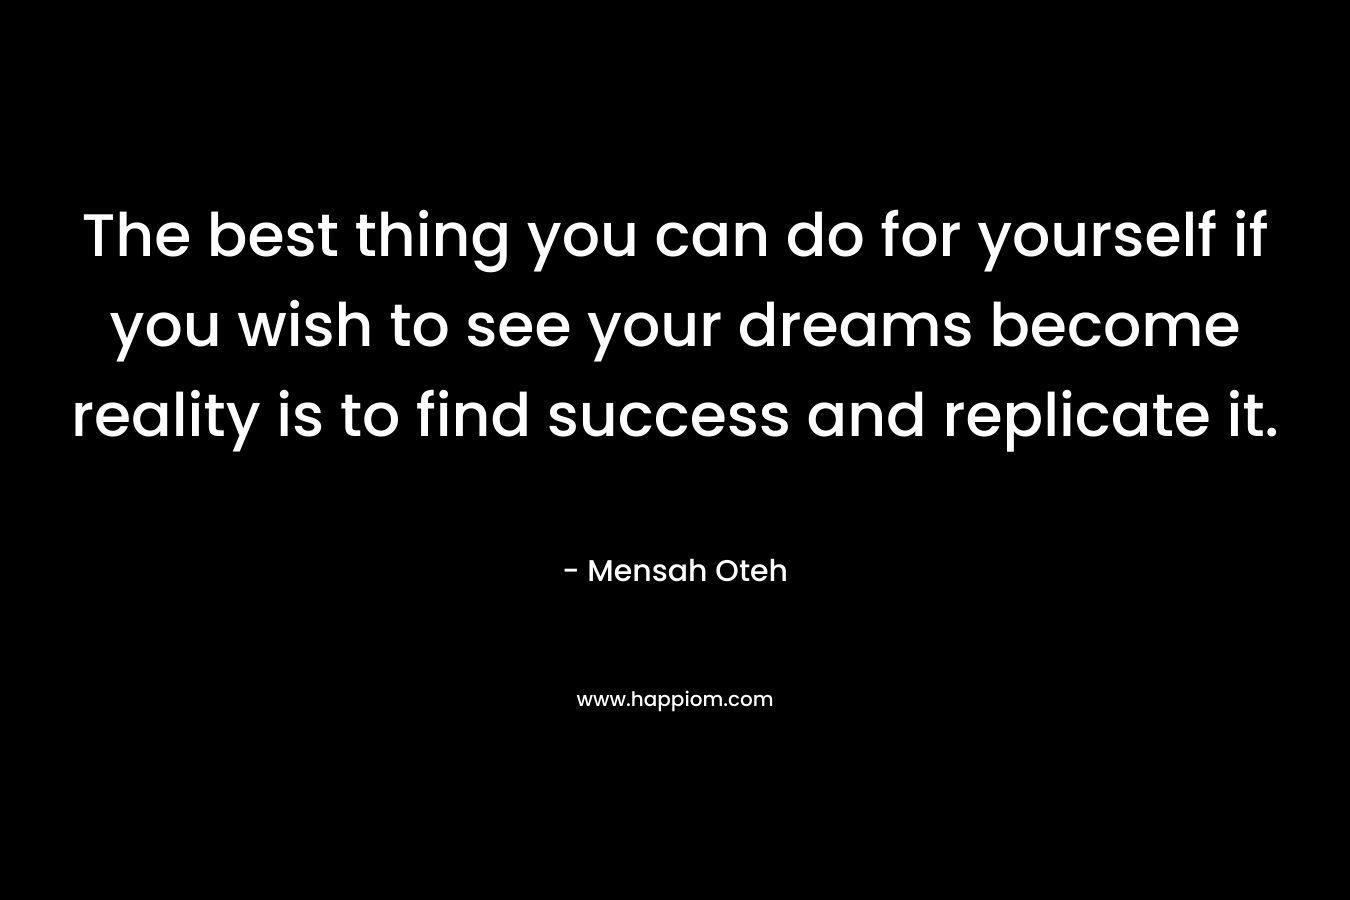 The best thing you can do for yourself if you wish to see your dreams become reality is to find success and replicate it.